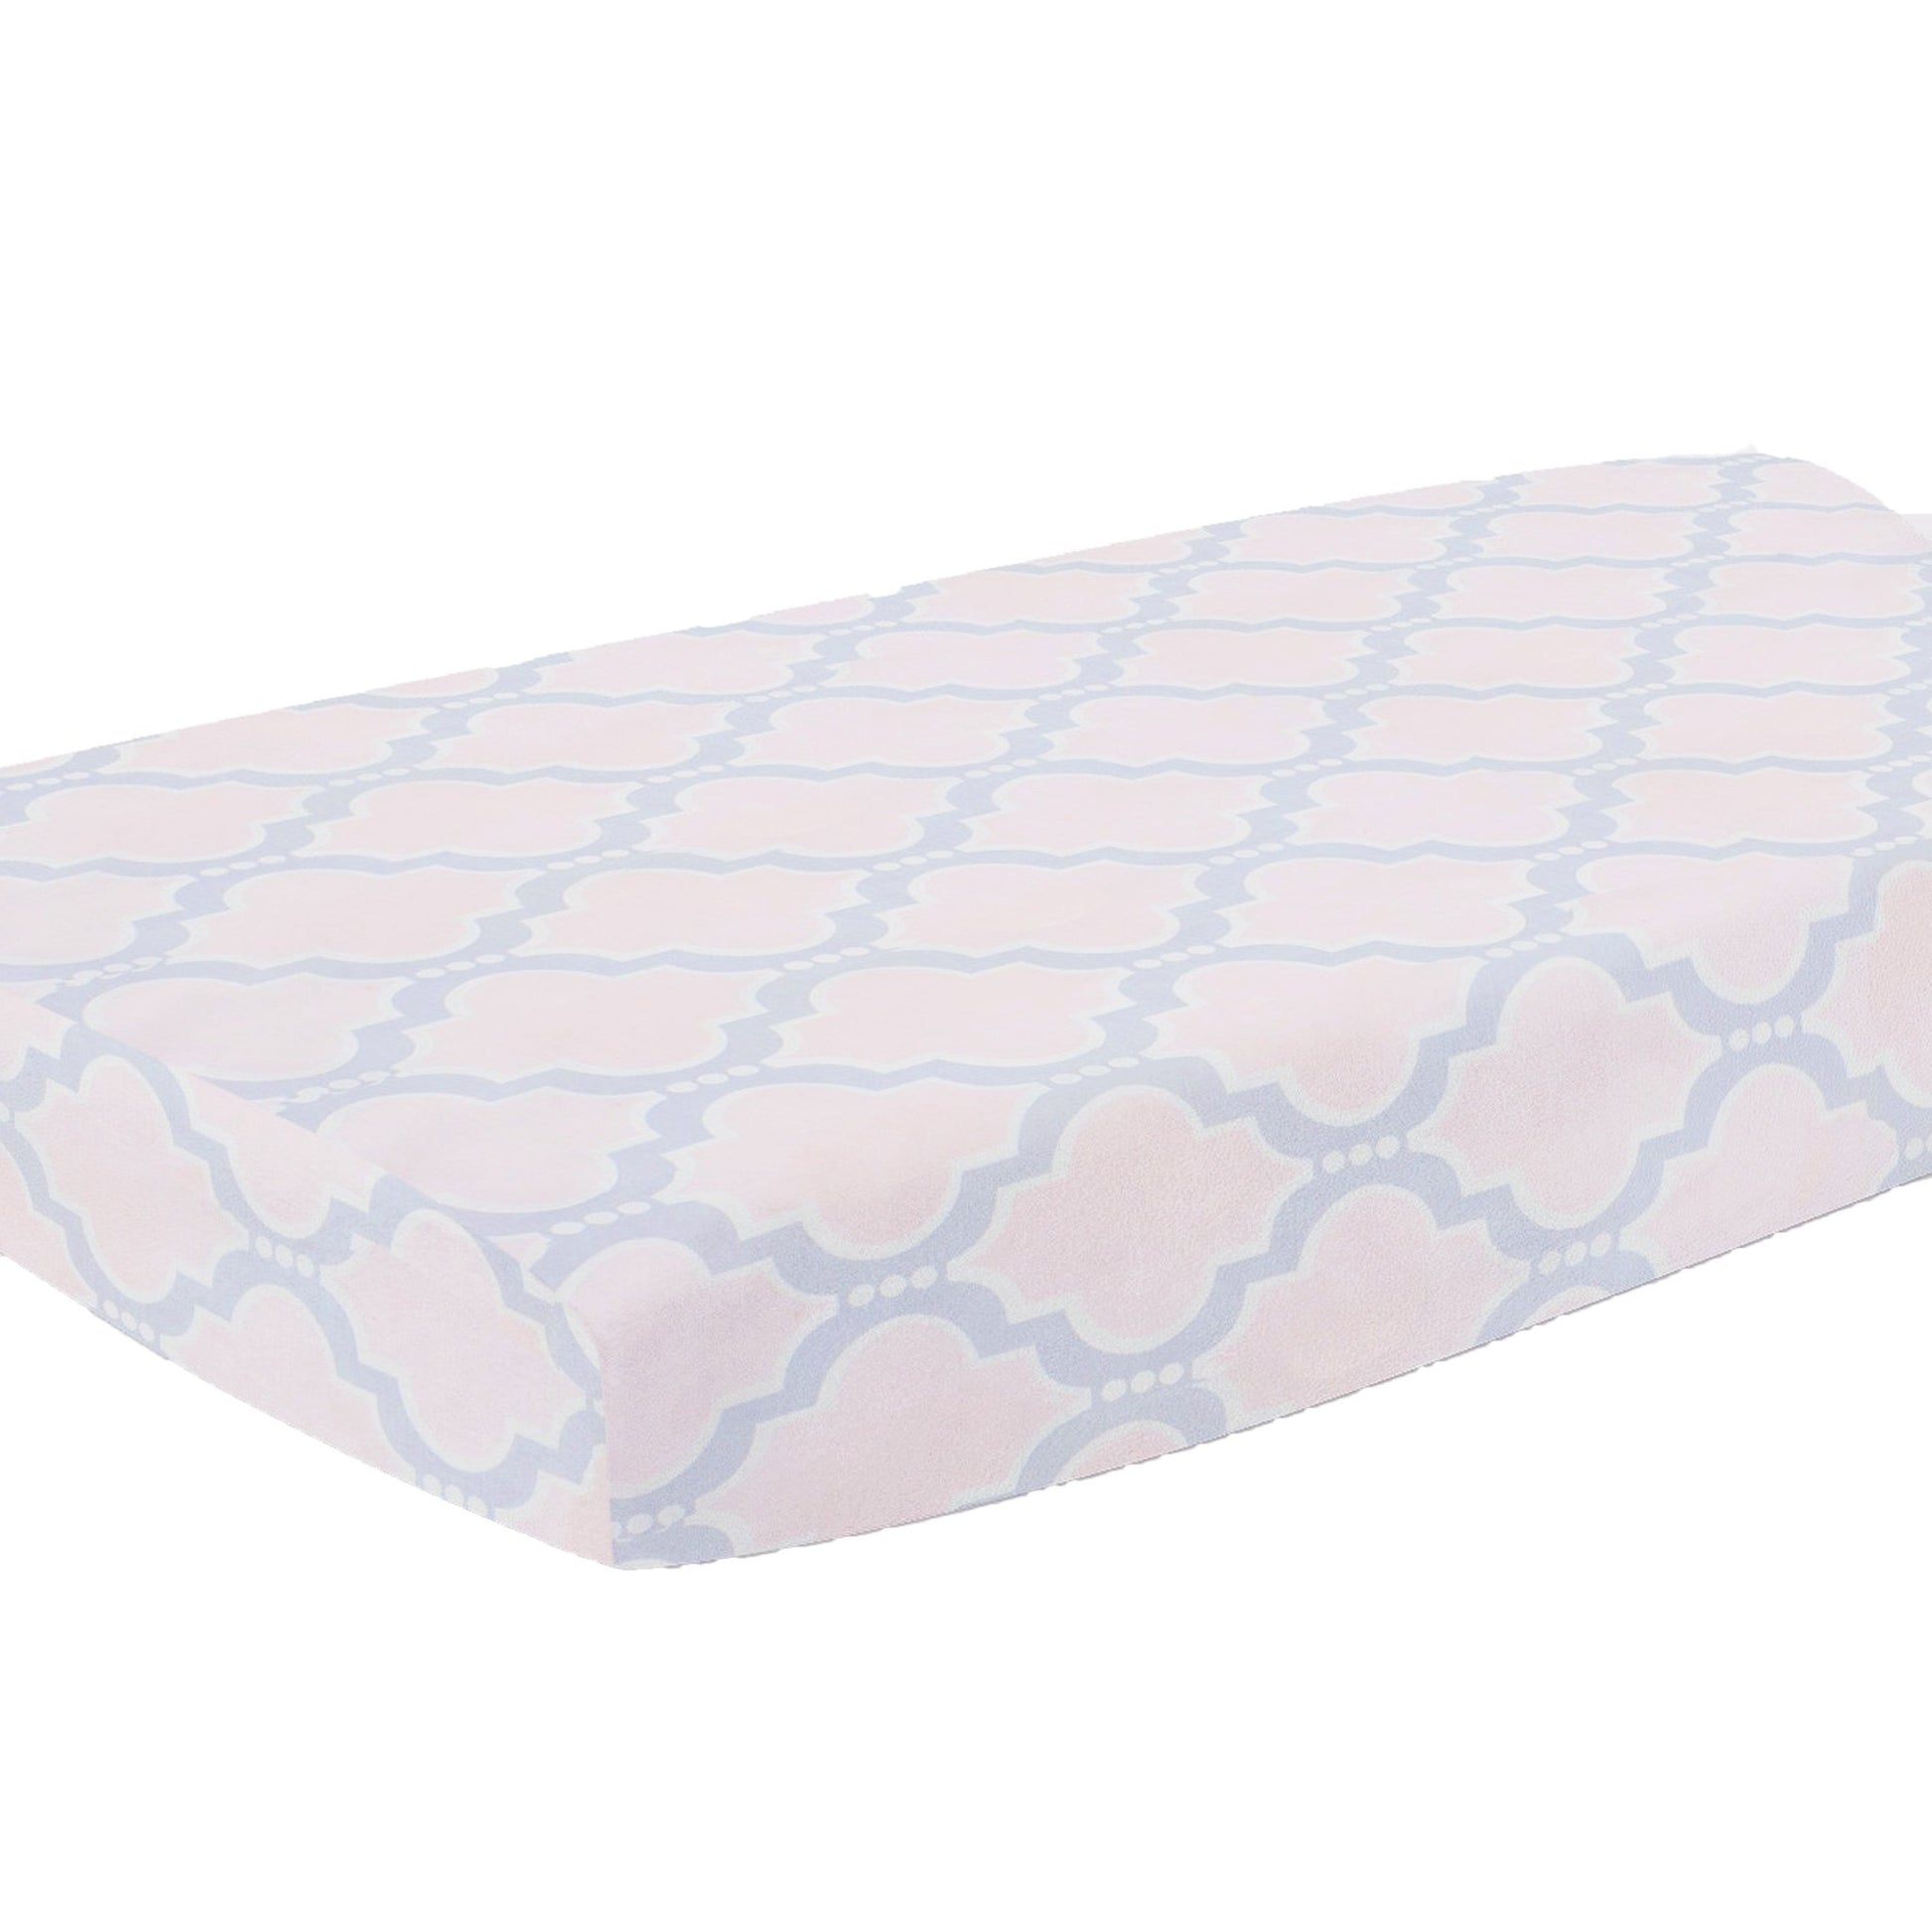 Pink Medallion Changing Pad Cover - New Arrivals Inc